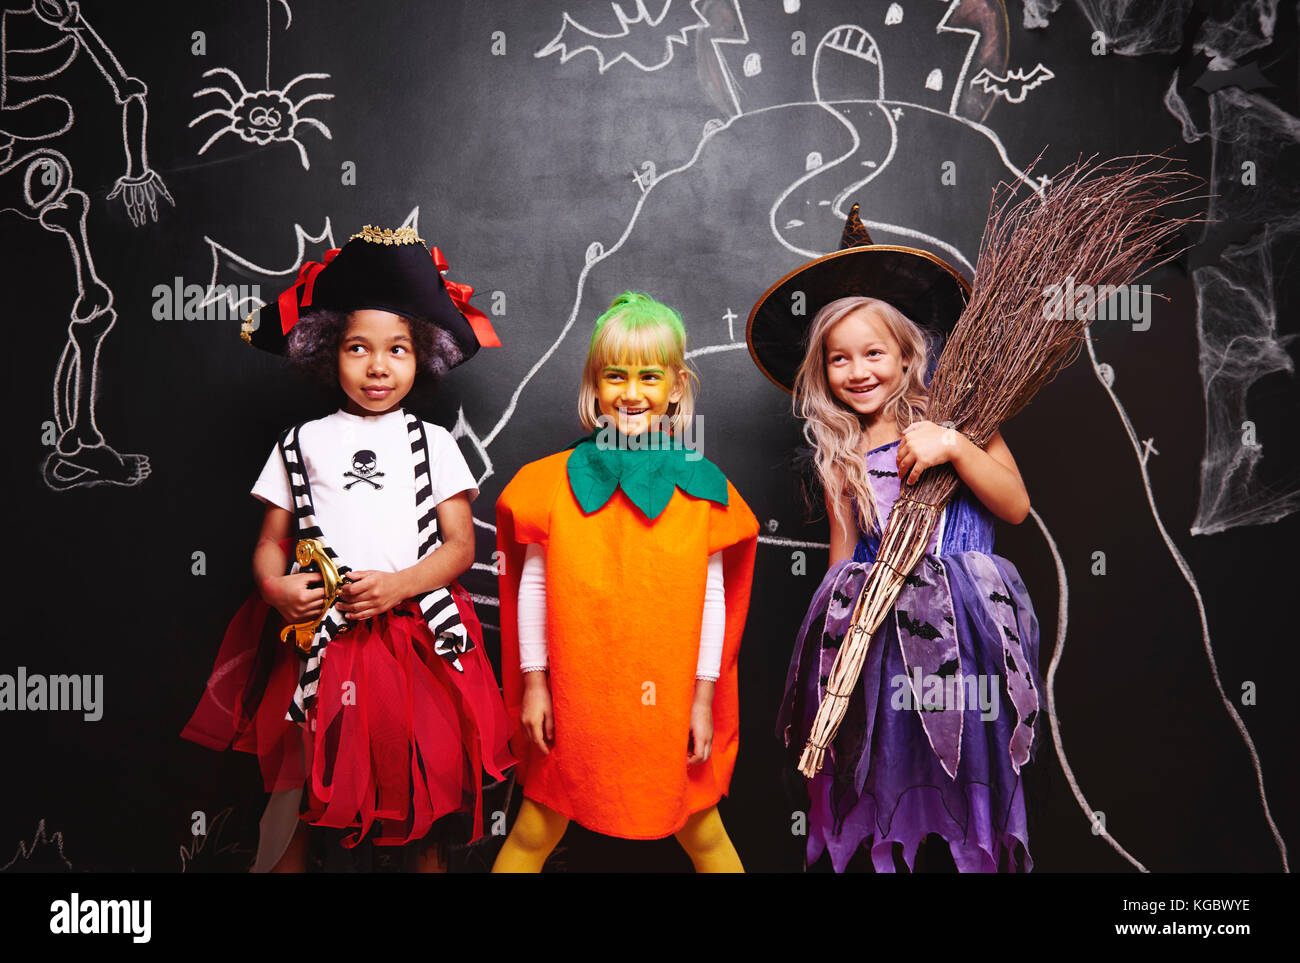 Group of kids at halloween Stock Photo